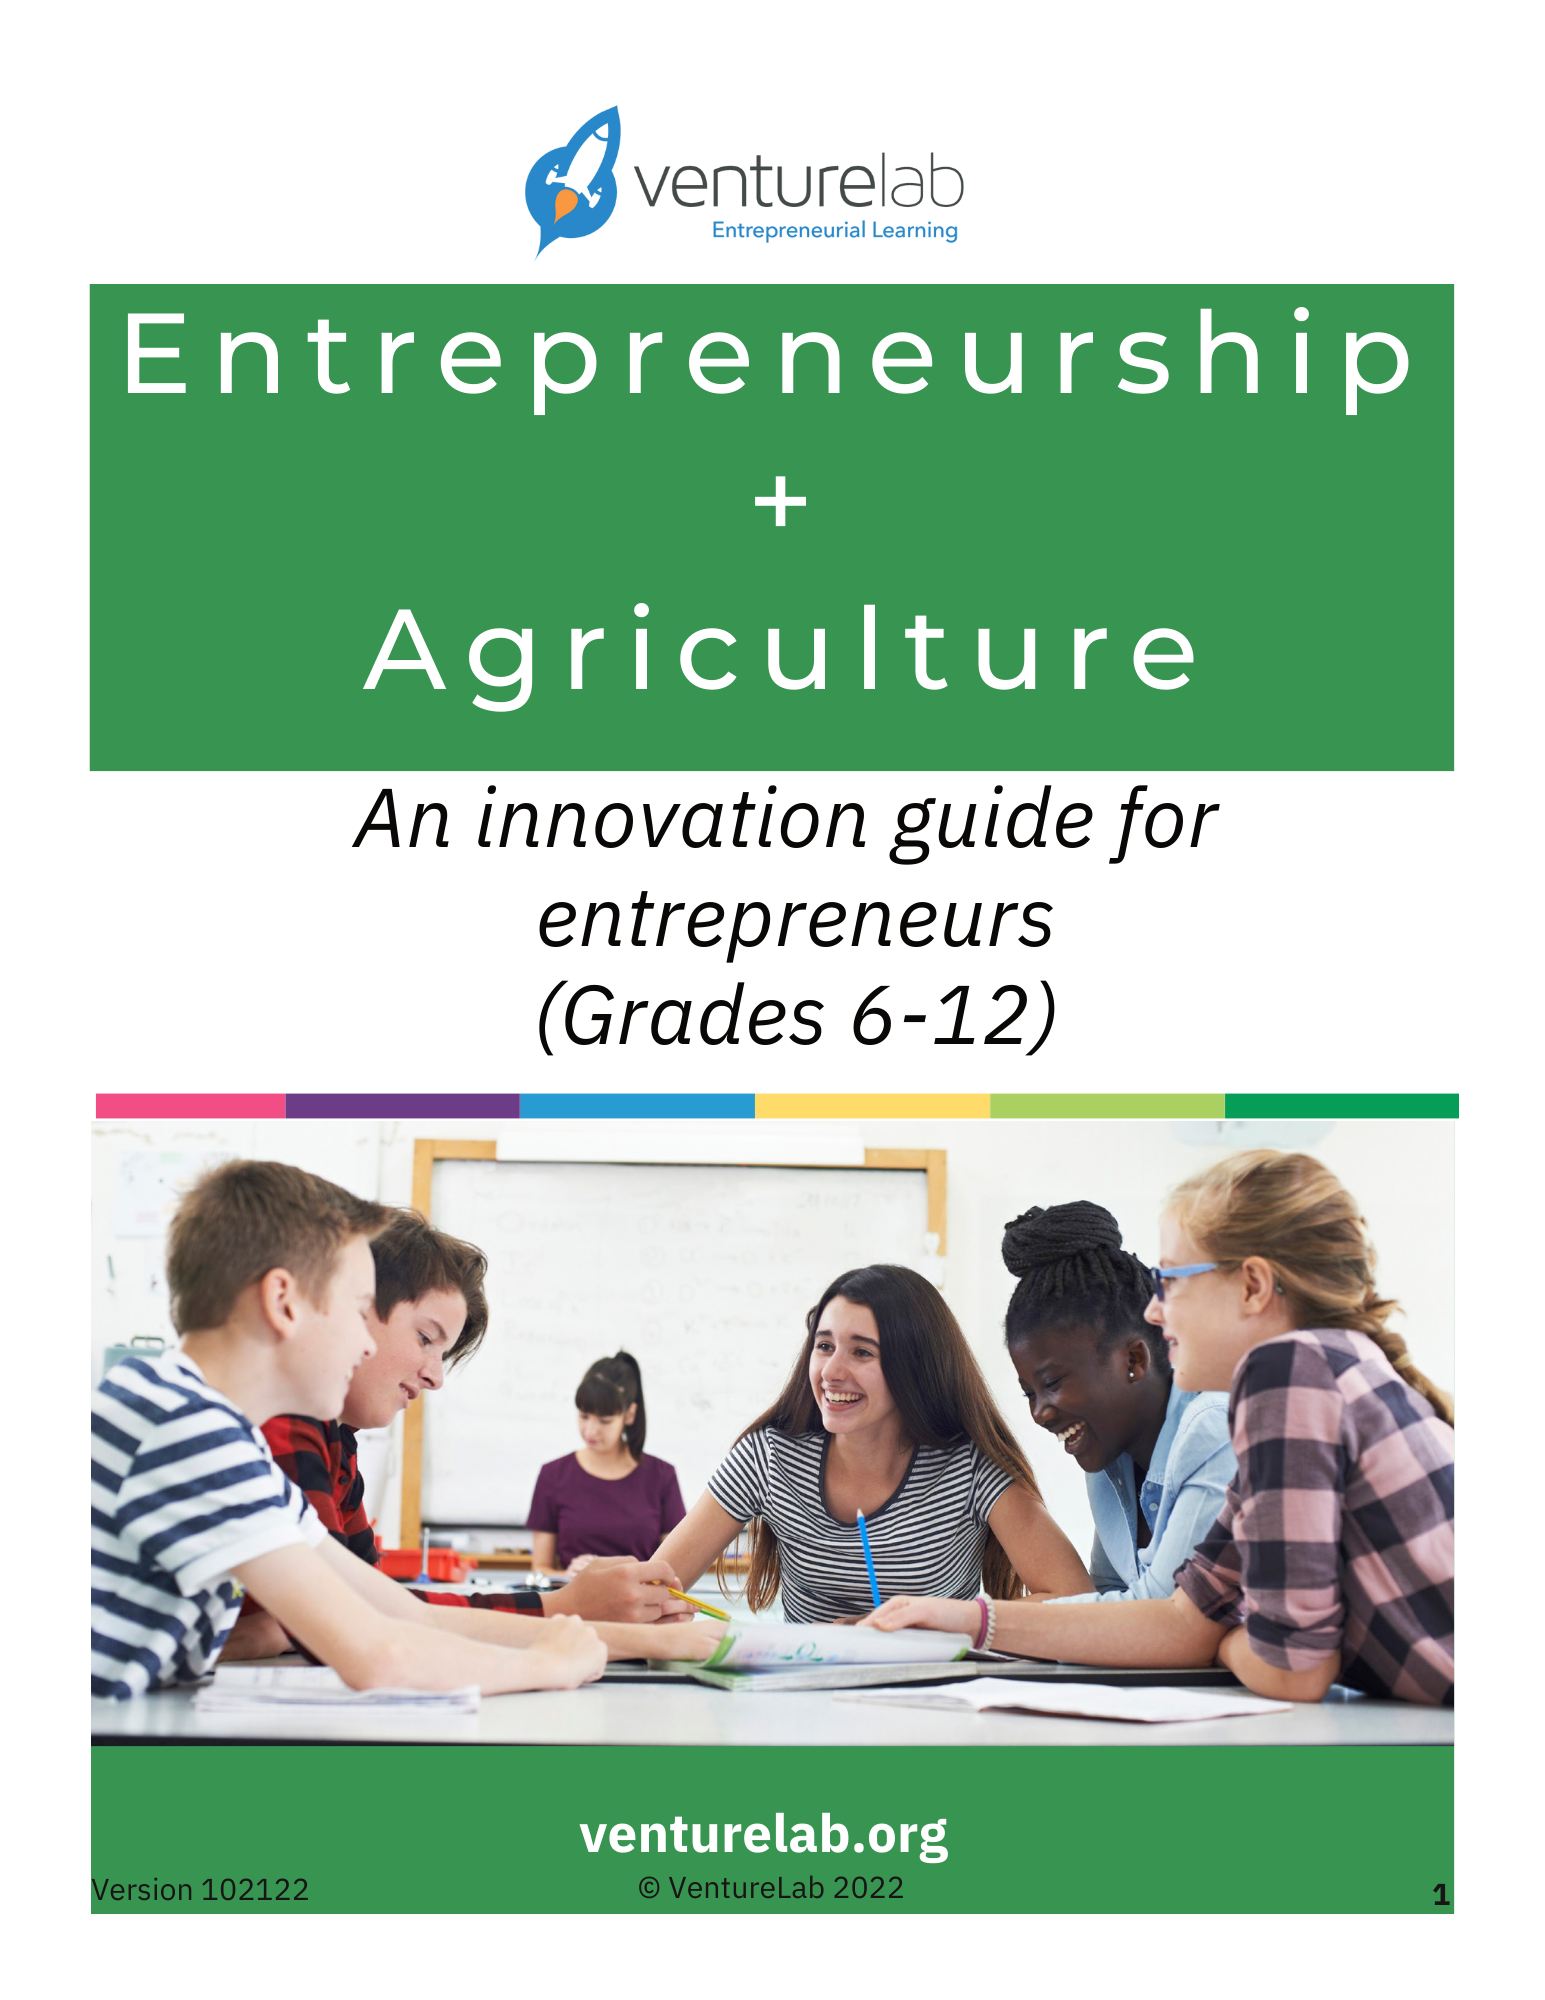 Cover of "agriculture entrepreneurship program: an innovation guide for grades 6-12" showing students engaged in discussion around a table.